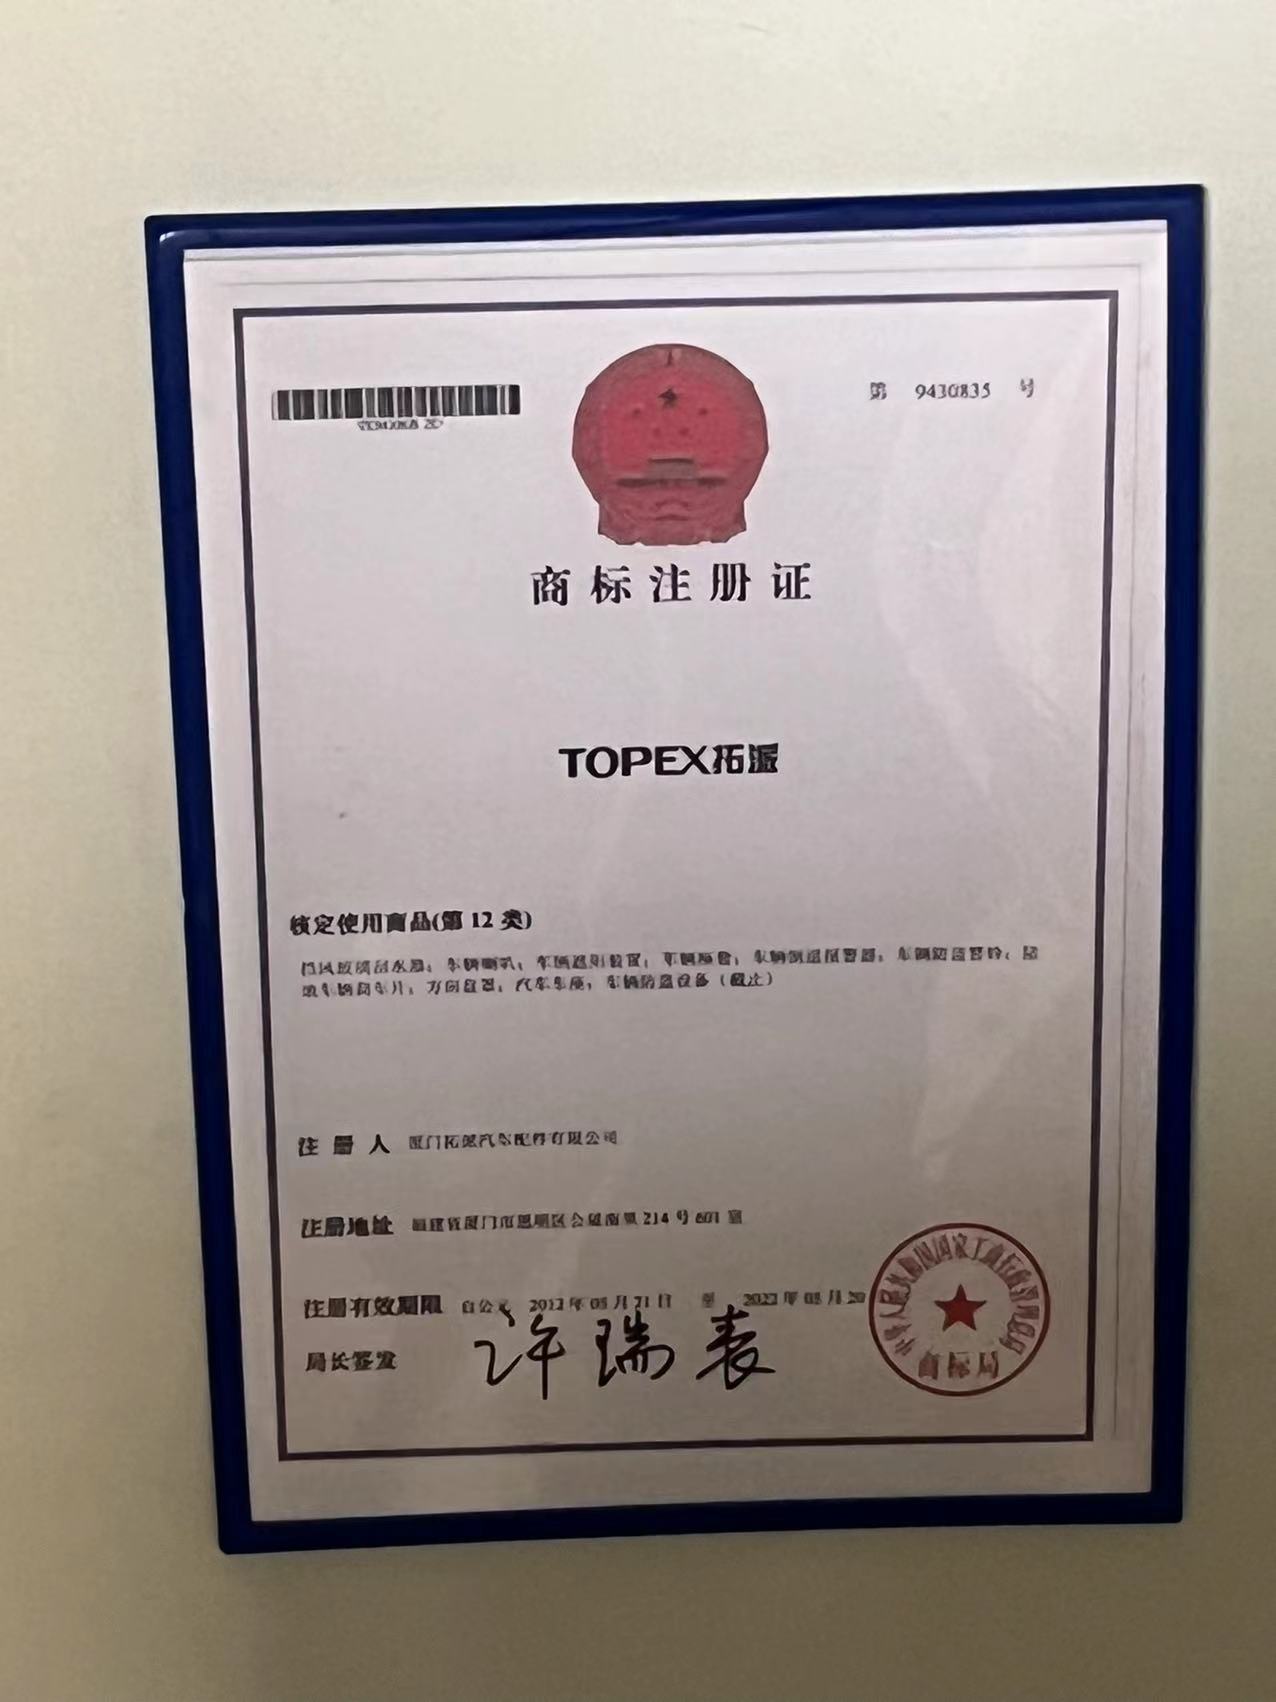 Topex Certification